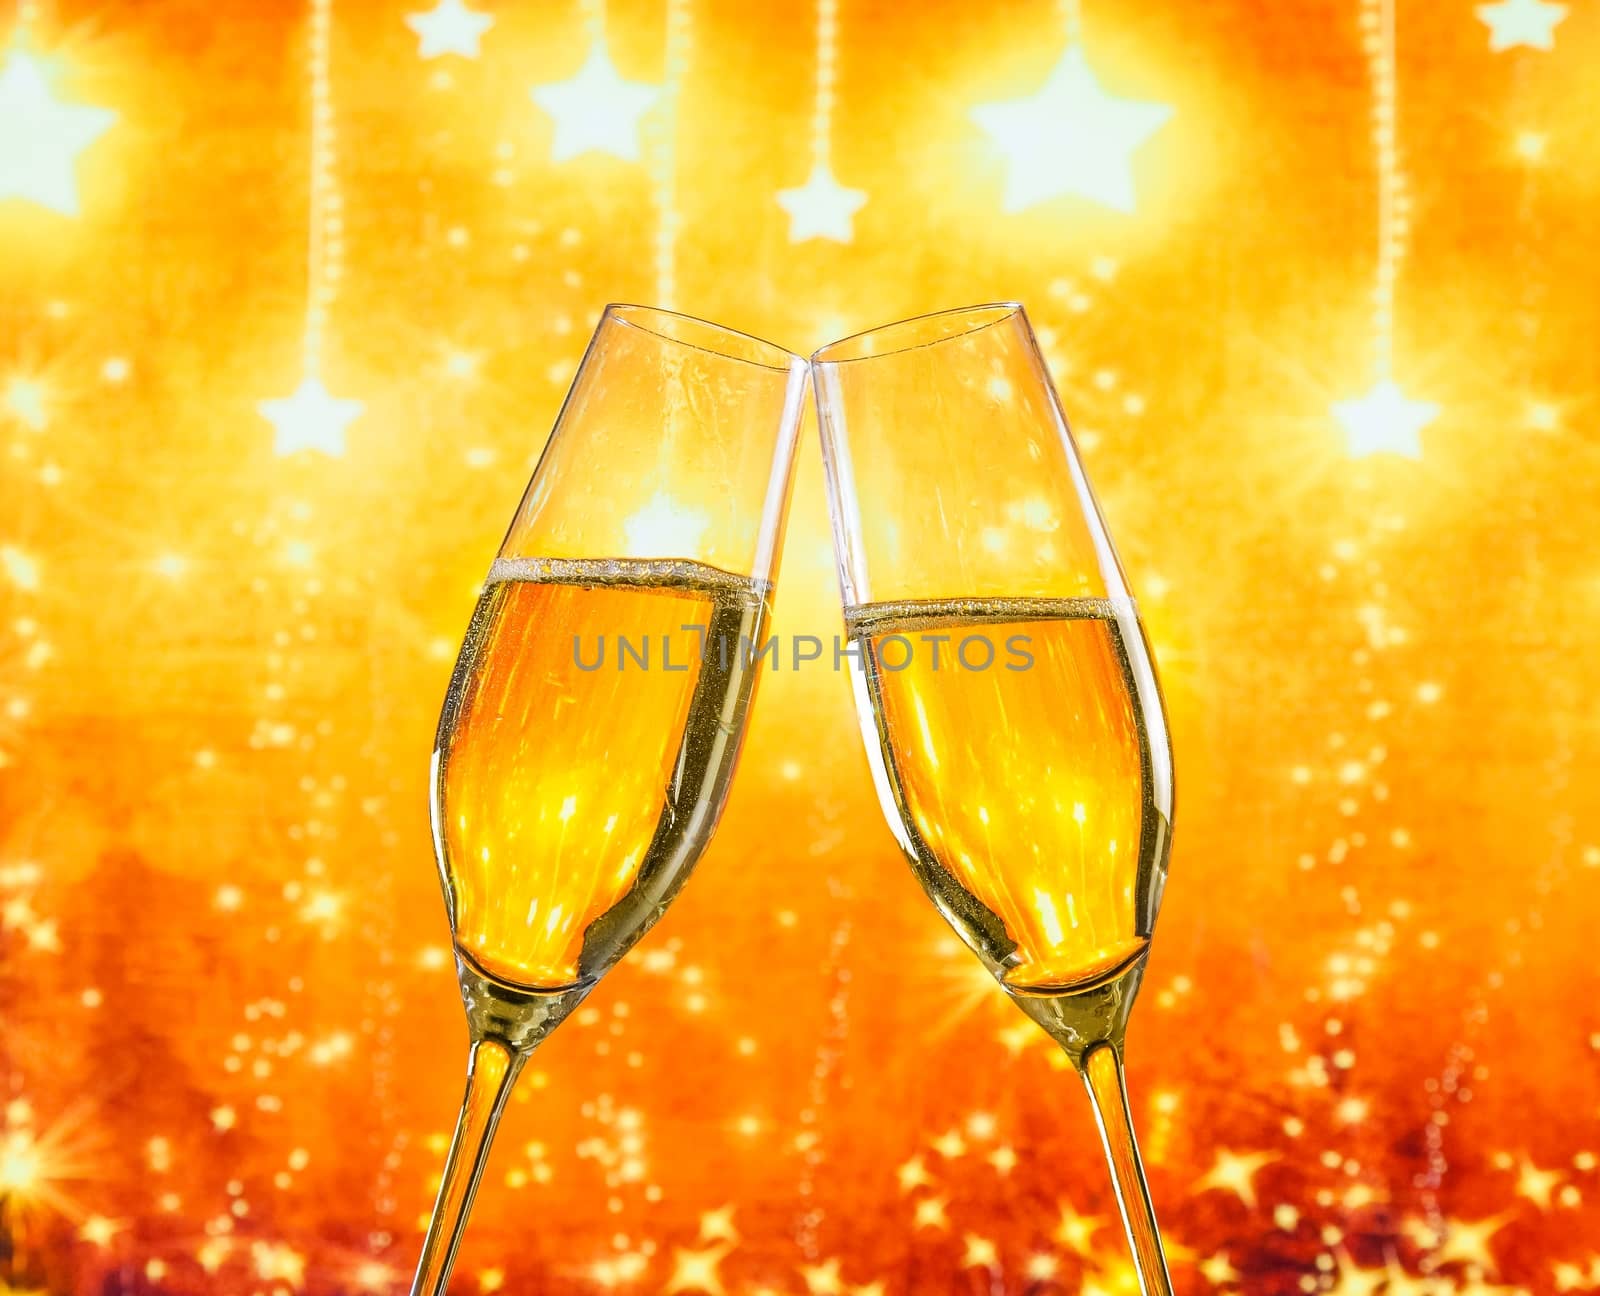 a pair of champagne flutes with golden bubbles on golden stars light background by donfiore